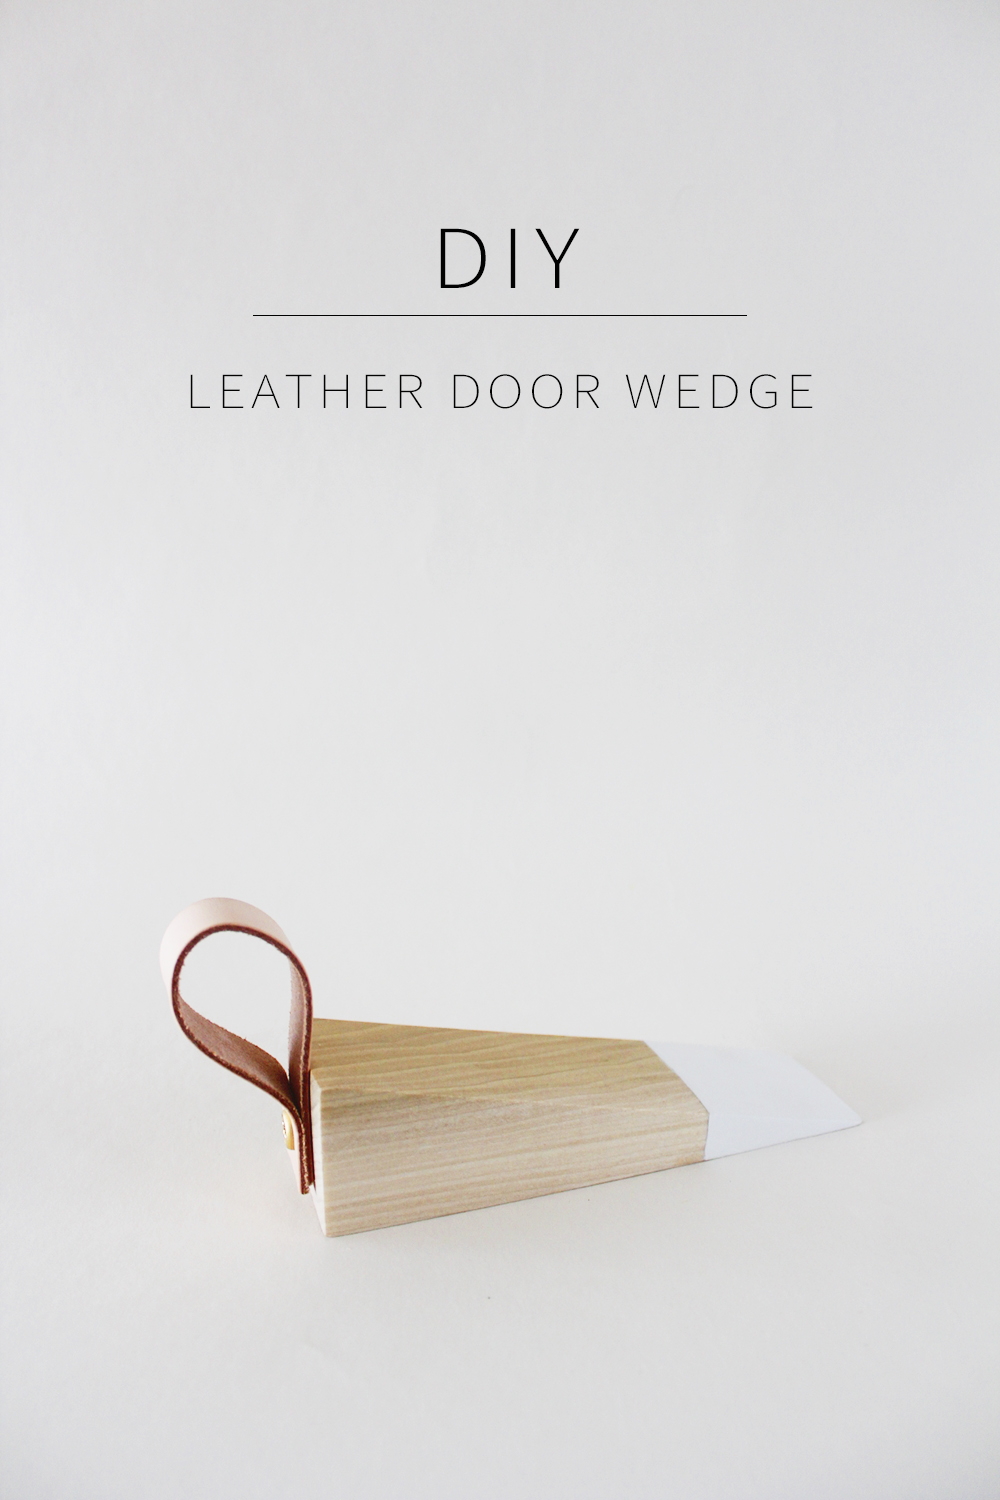 Learn how to make a gorgeous DIY door stop wedge with this tutorial from Annabode